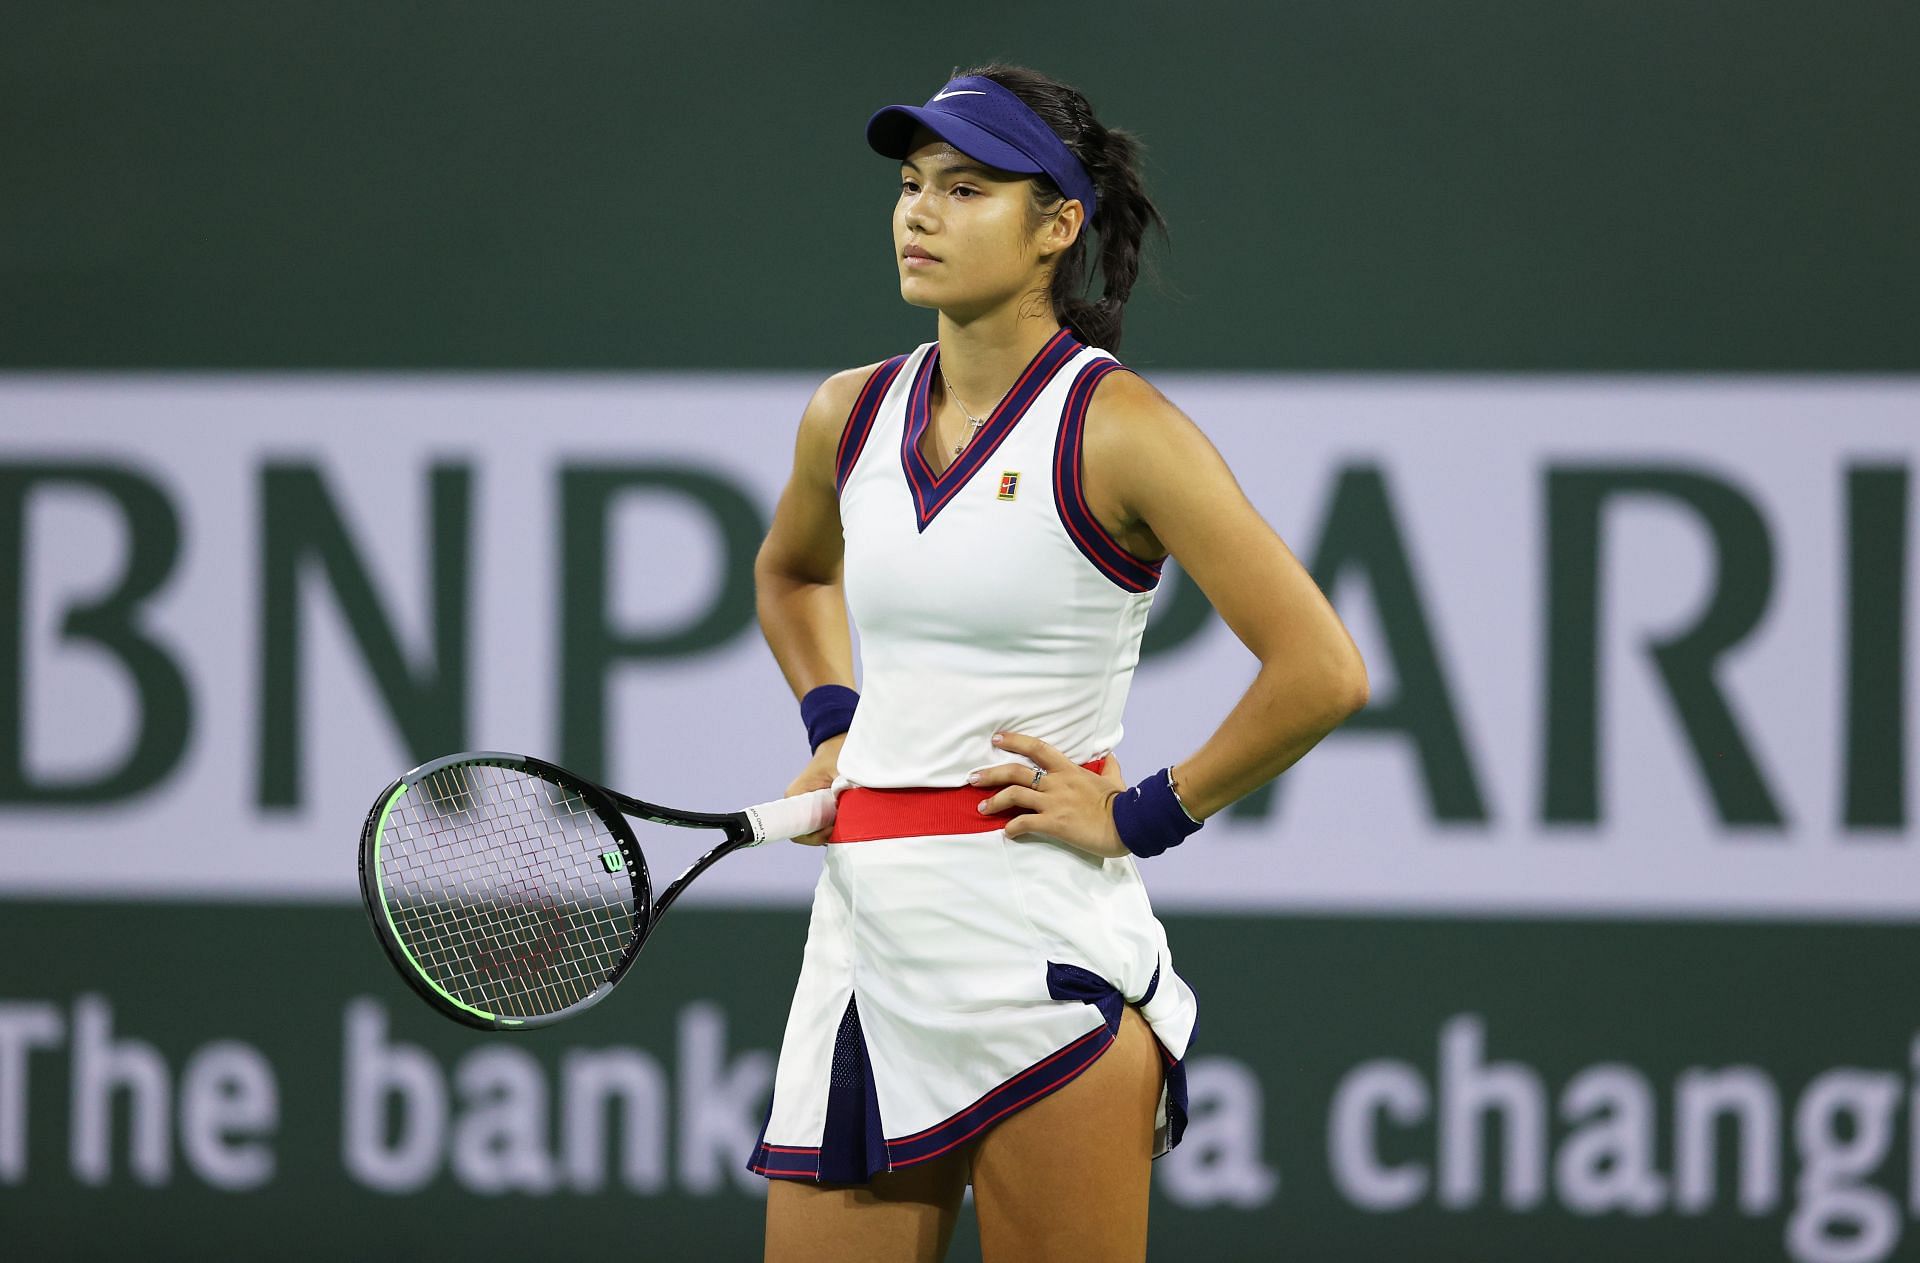 Emma Raducanu lost in the first round of the 2021 BNP Paribas Open